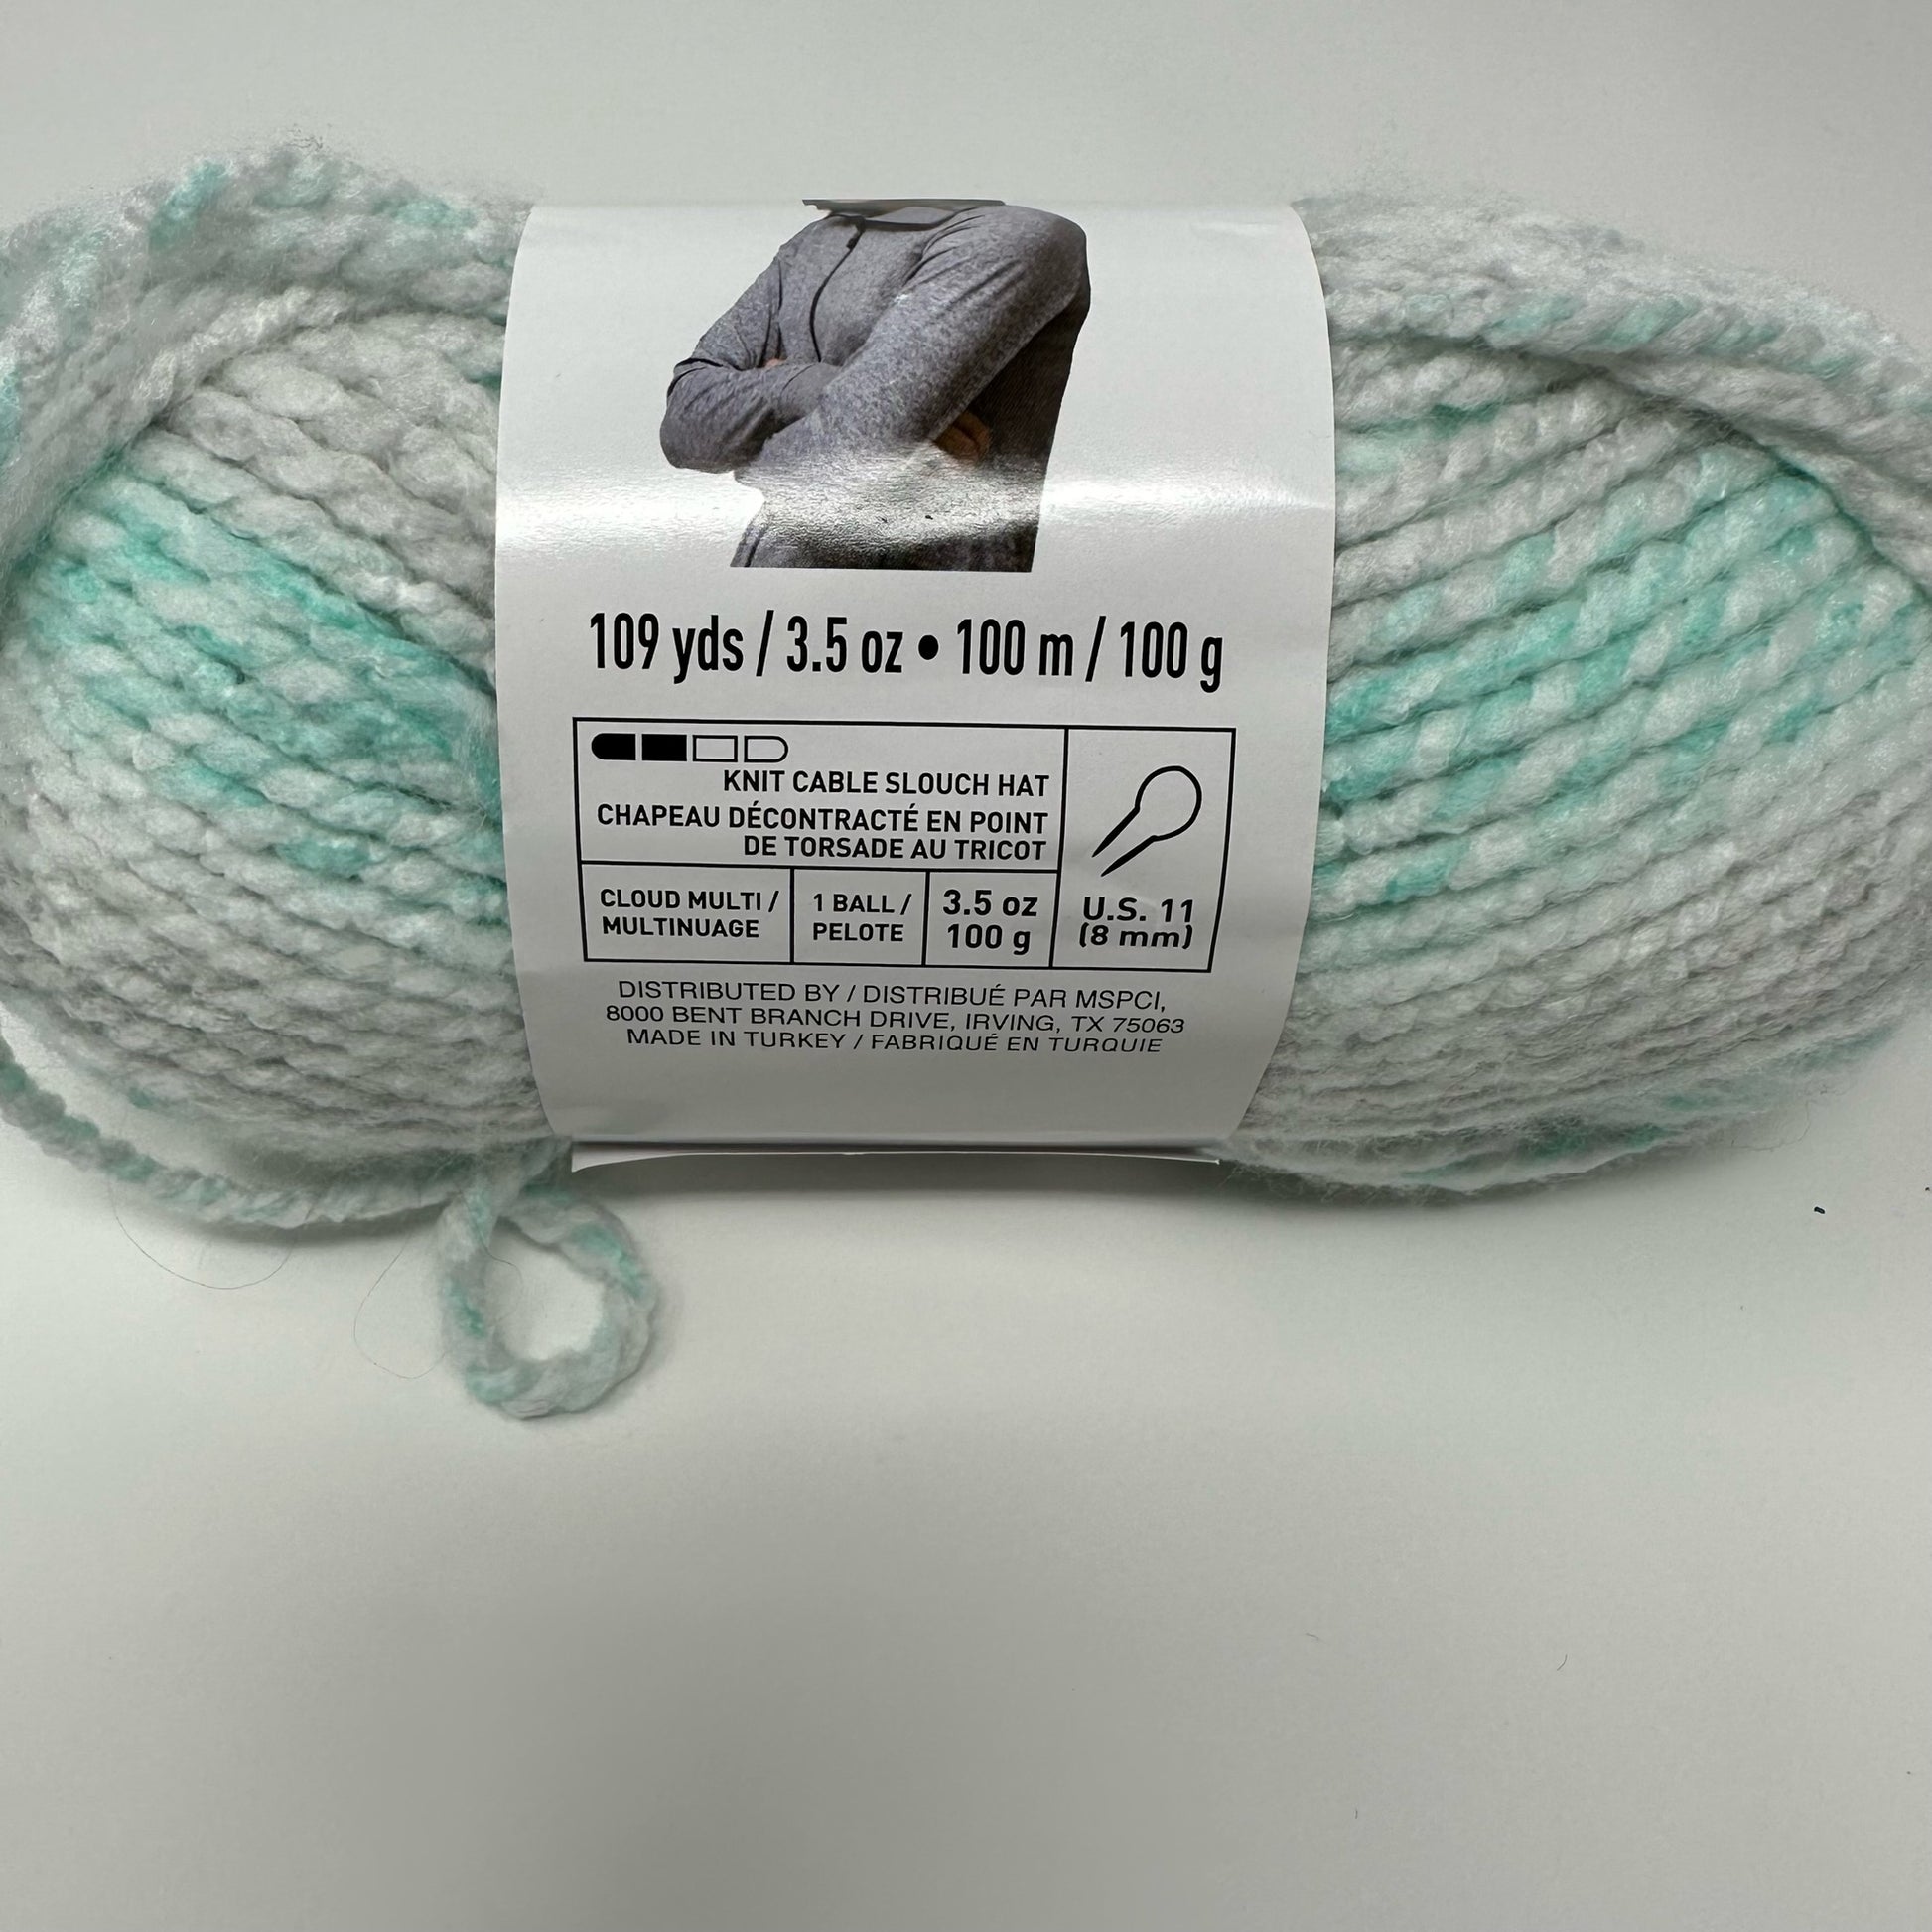 15 Pack: Charisma Sorbet Yarn by Loops & Threads, Size: 3.5, Silver